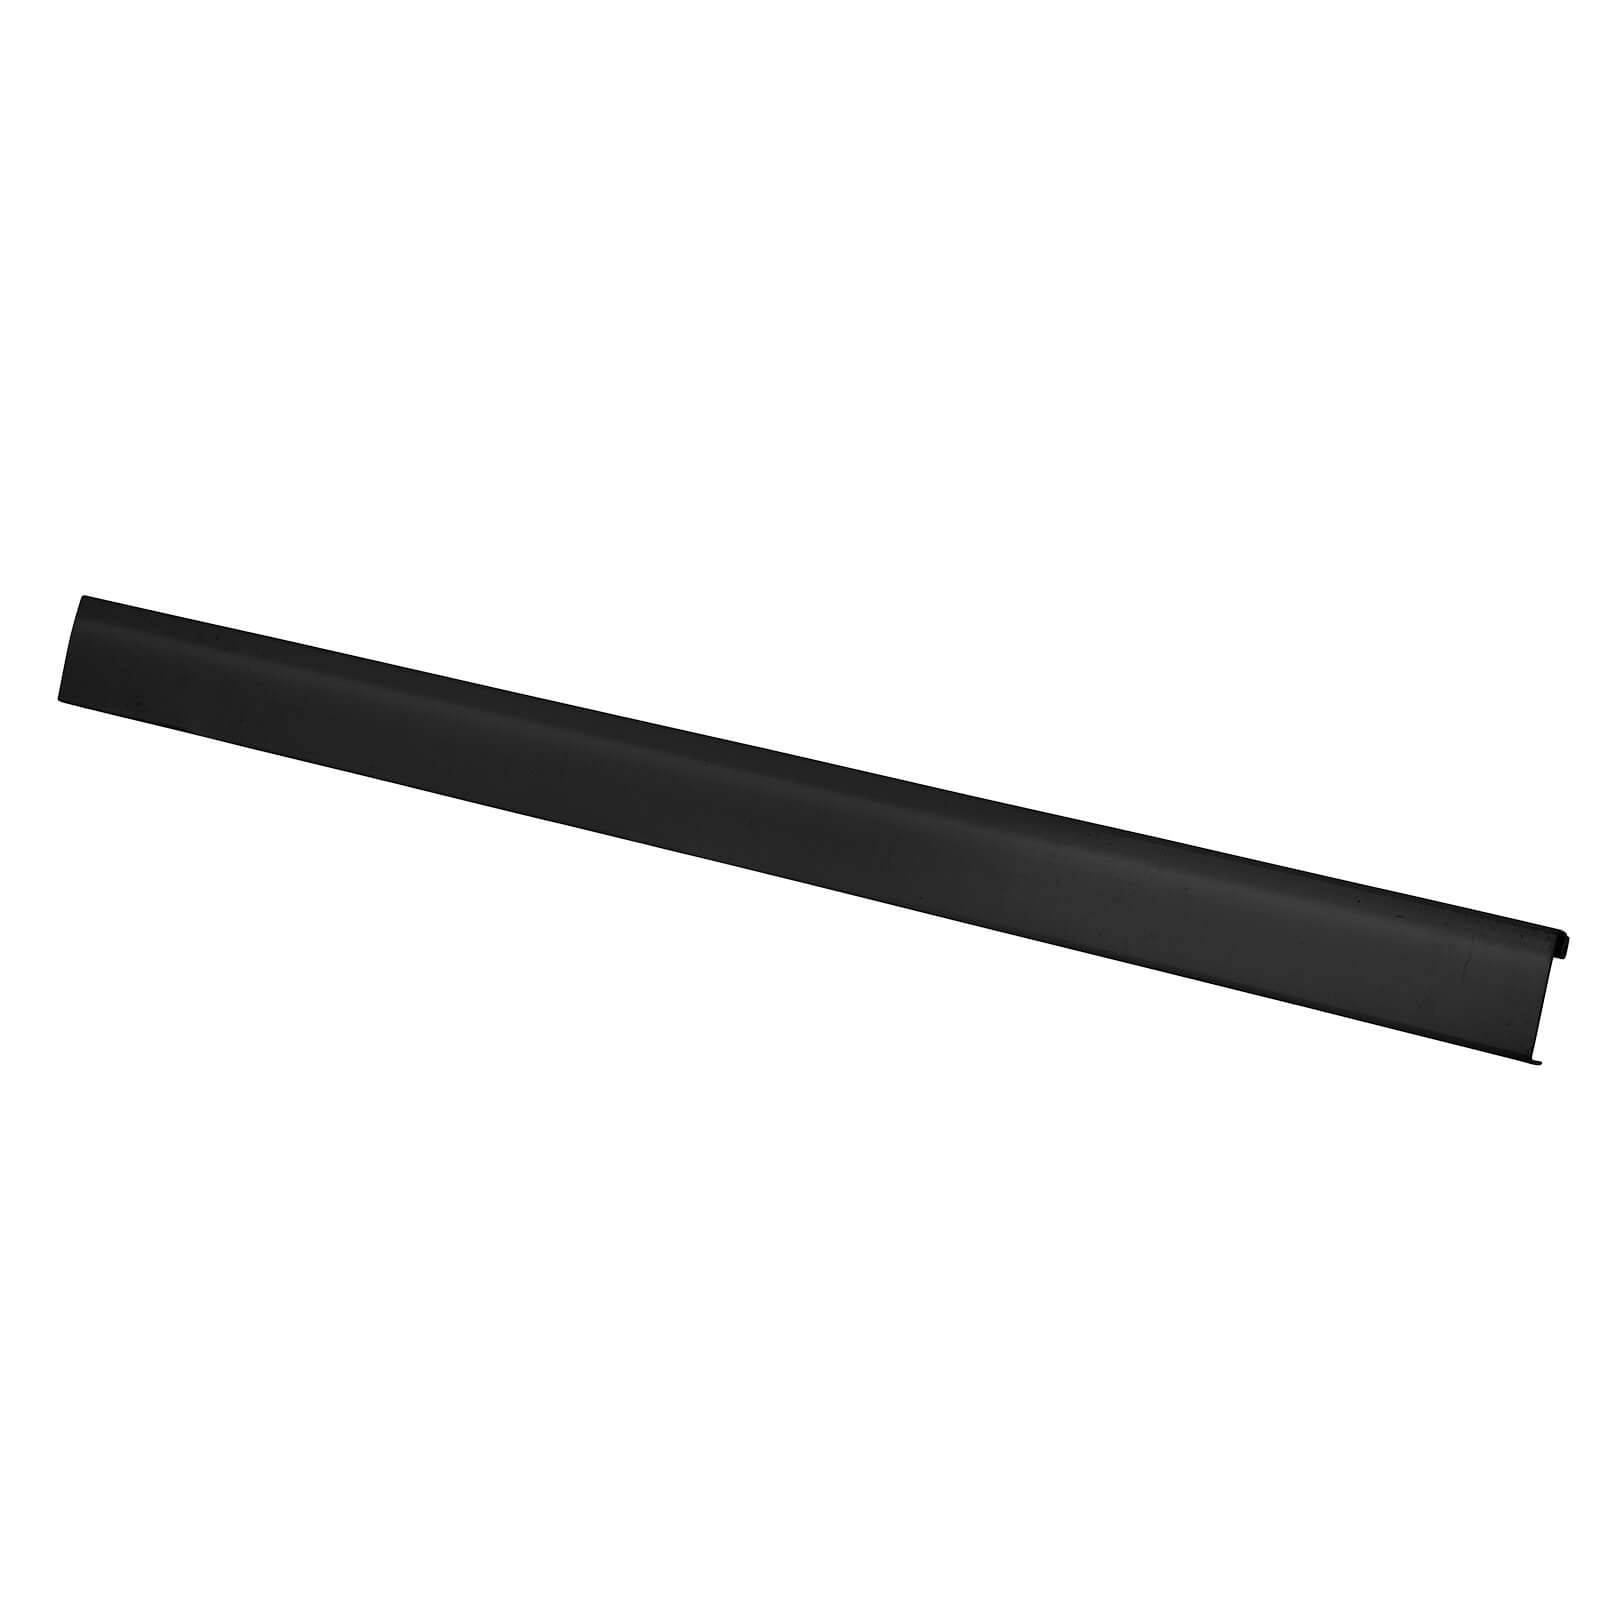 Hang Track Cover - Black - 558mm